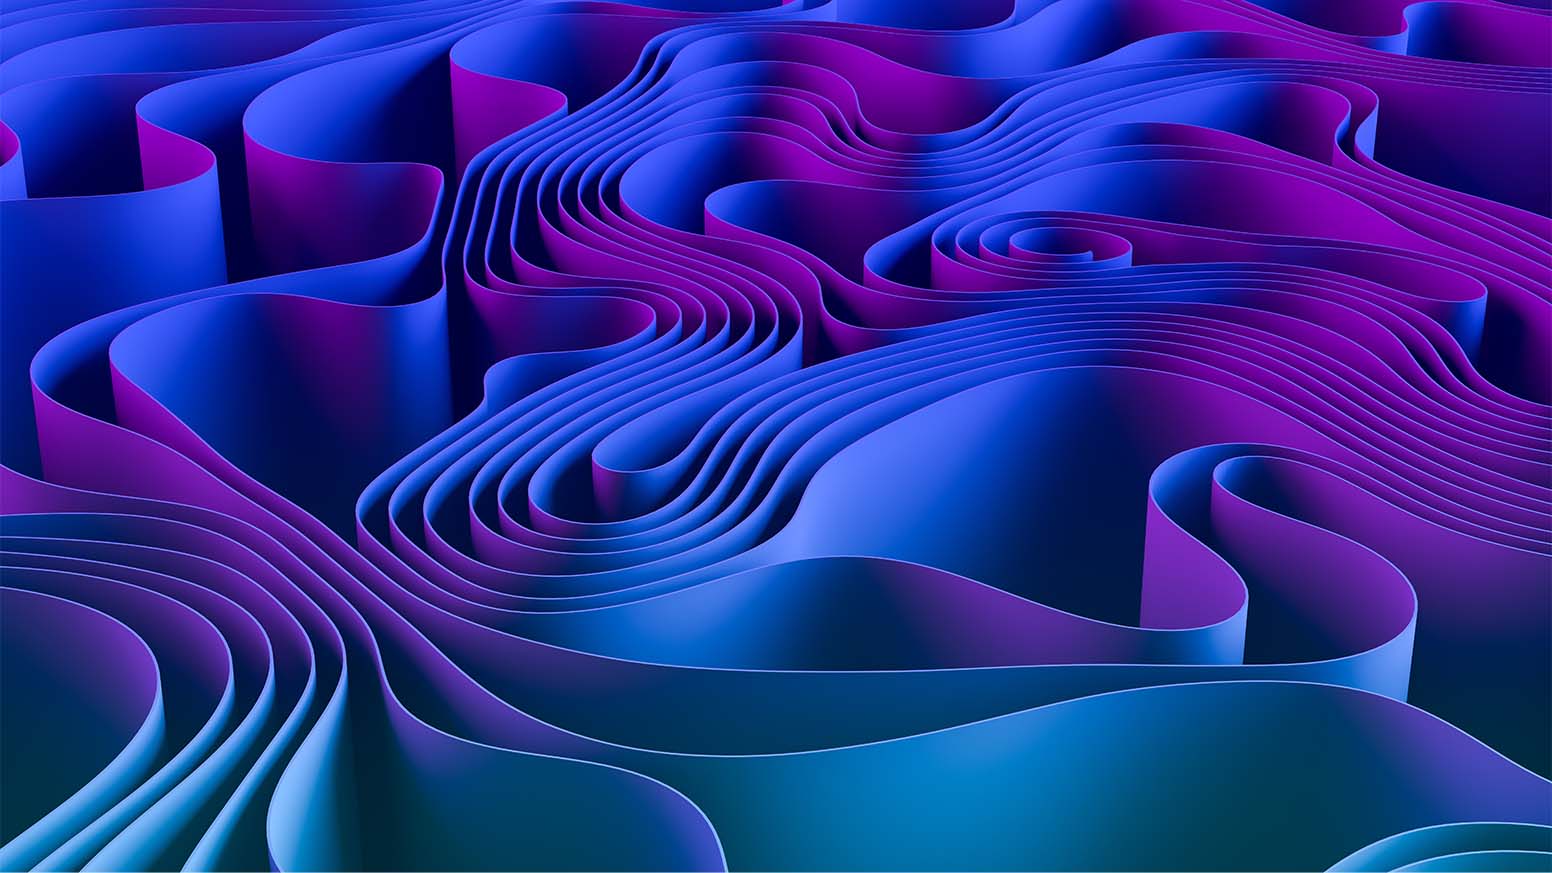 Blue and Purple wave pattern